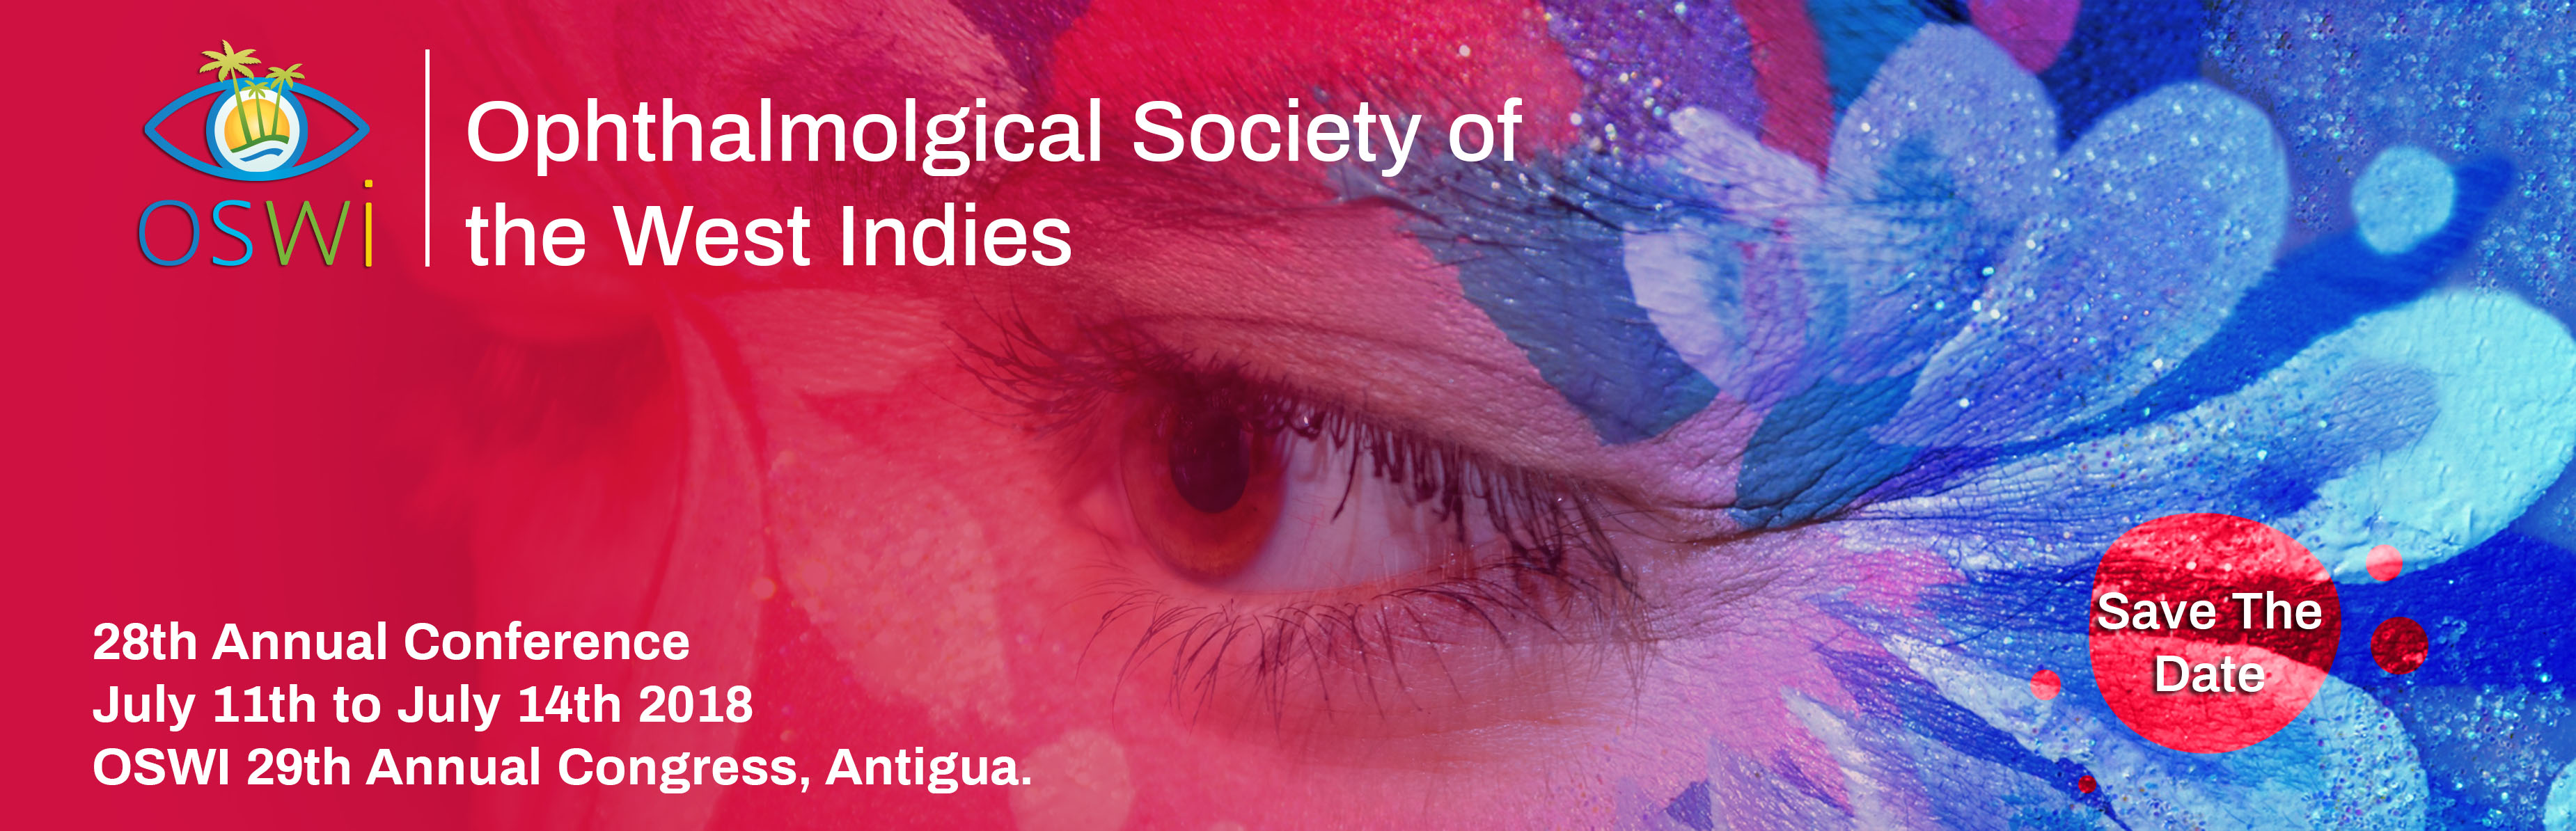 Ophthalmological Society of the West Indies